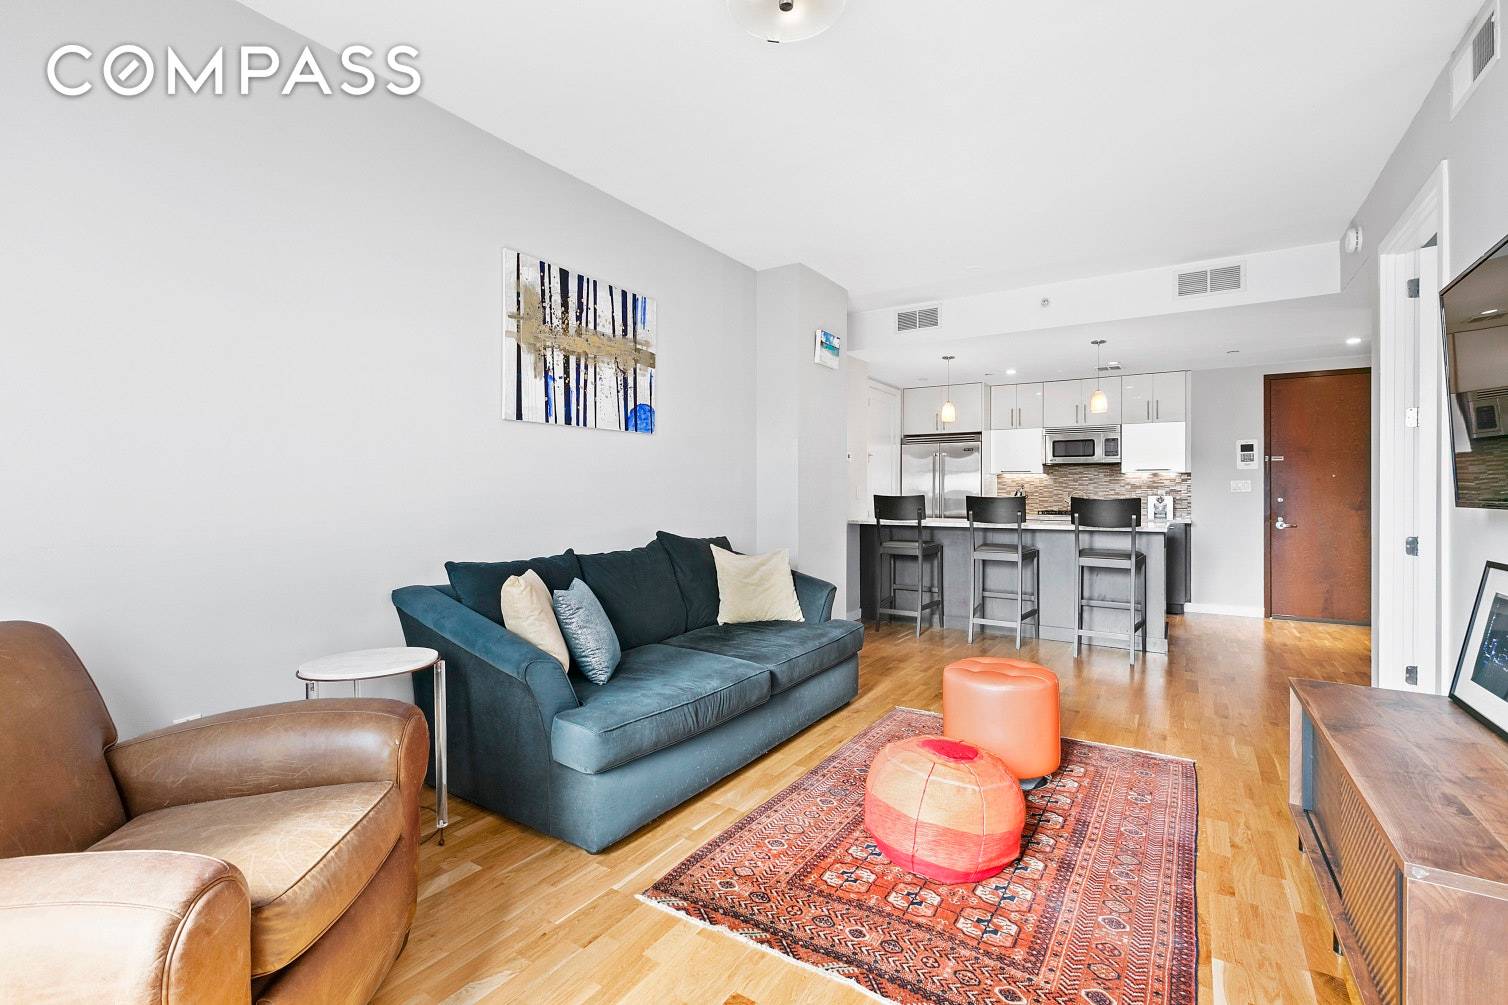 500 4th Avenue, Apt. 2O is a large 1 Bedroom apartment 677Sqft with private terrace additional 145 SqFt in a full service luxury condominium located where Park Slope meets Gowanus.